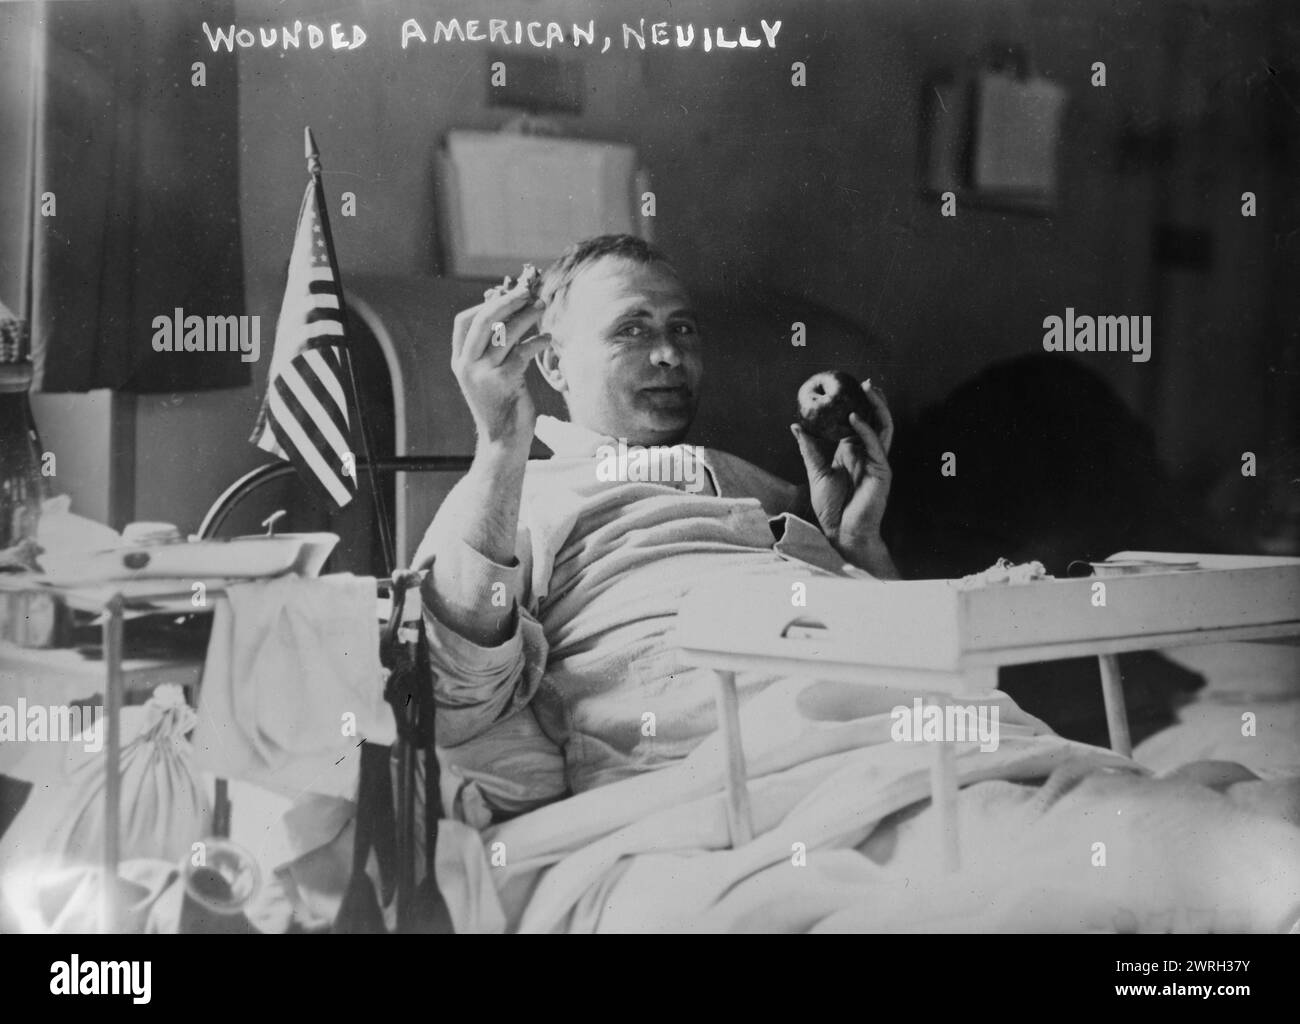 Wounded American, Neuilly, 1918 or 1919. A wounded American soldier in hospital bed, Neuilly, France, during or shortly after World War I. Stock Photo